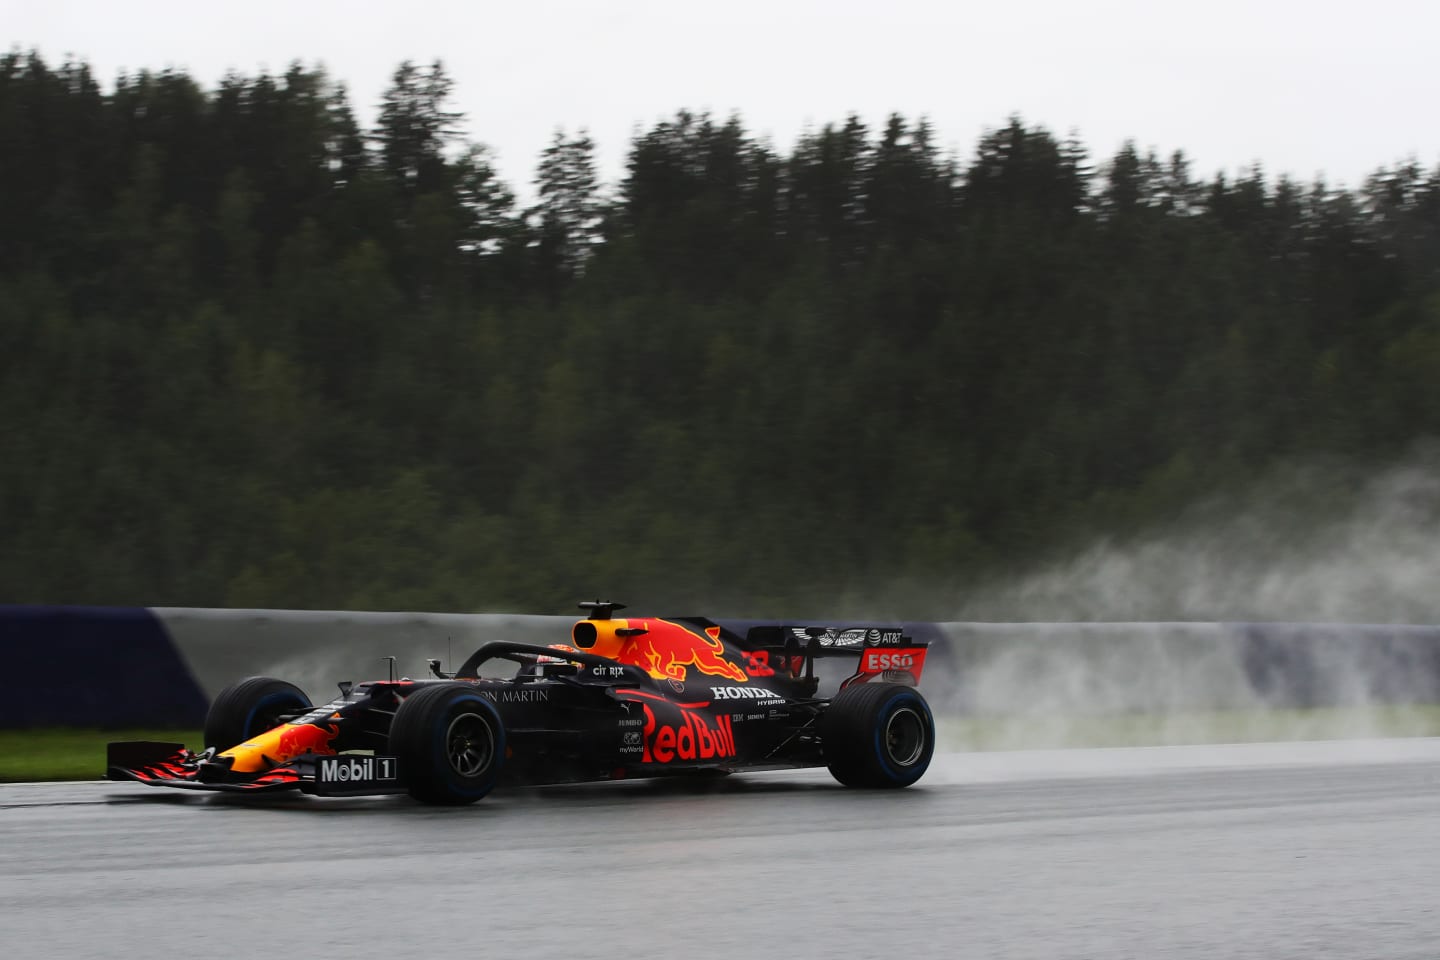 SPIELBERG, AUSTRIA - JULY 11: Max Verstappen of the Netherlands driving the (33) Aston Martin Red